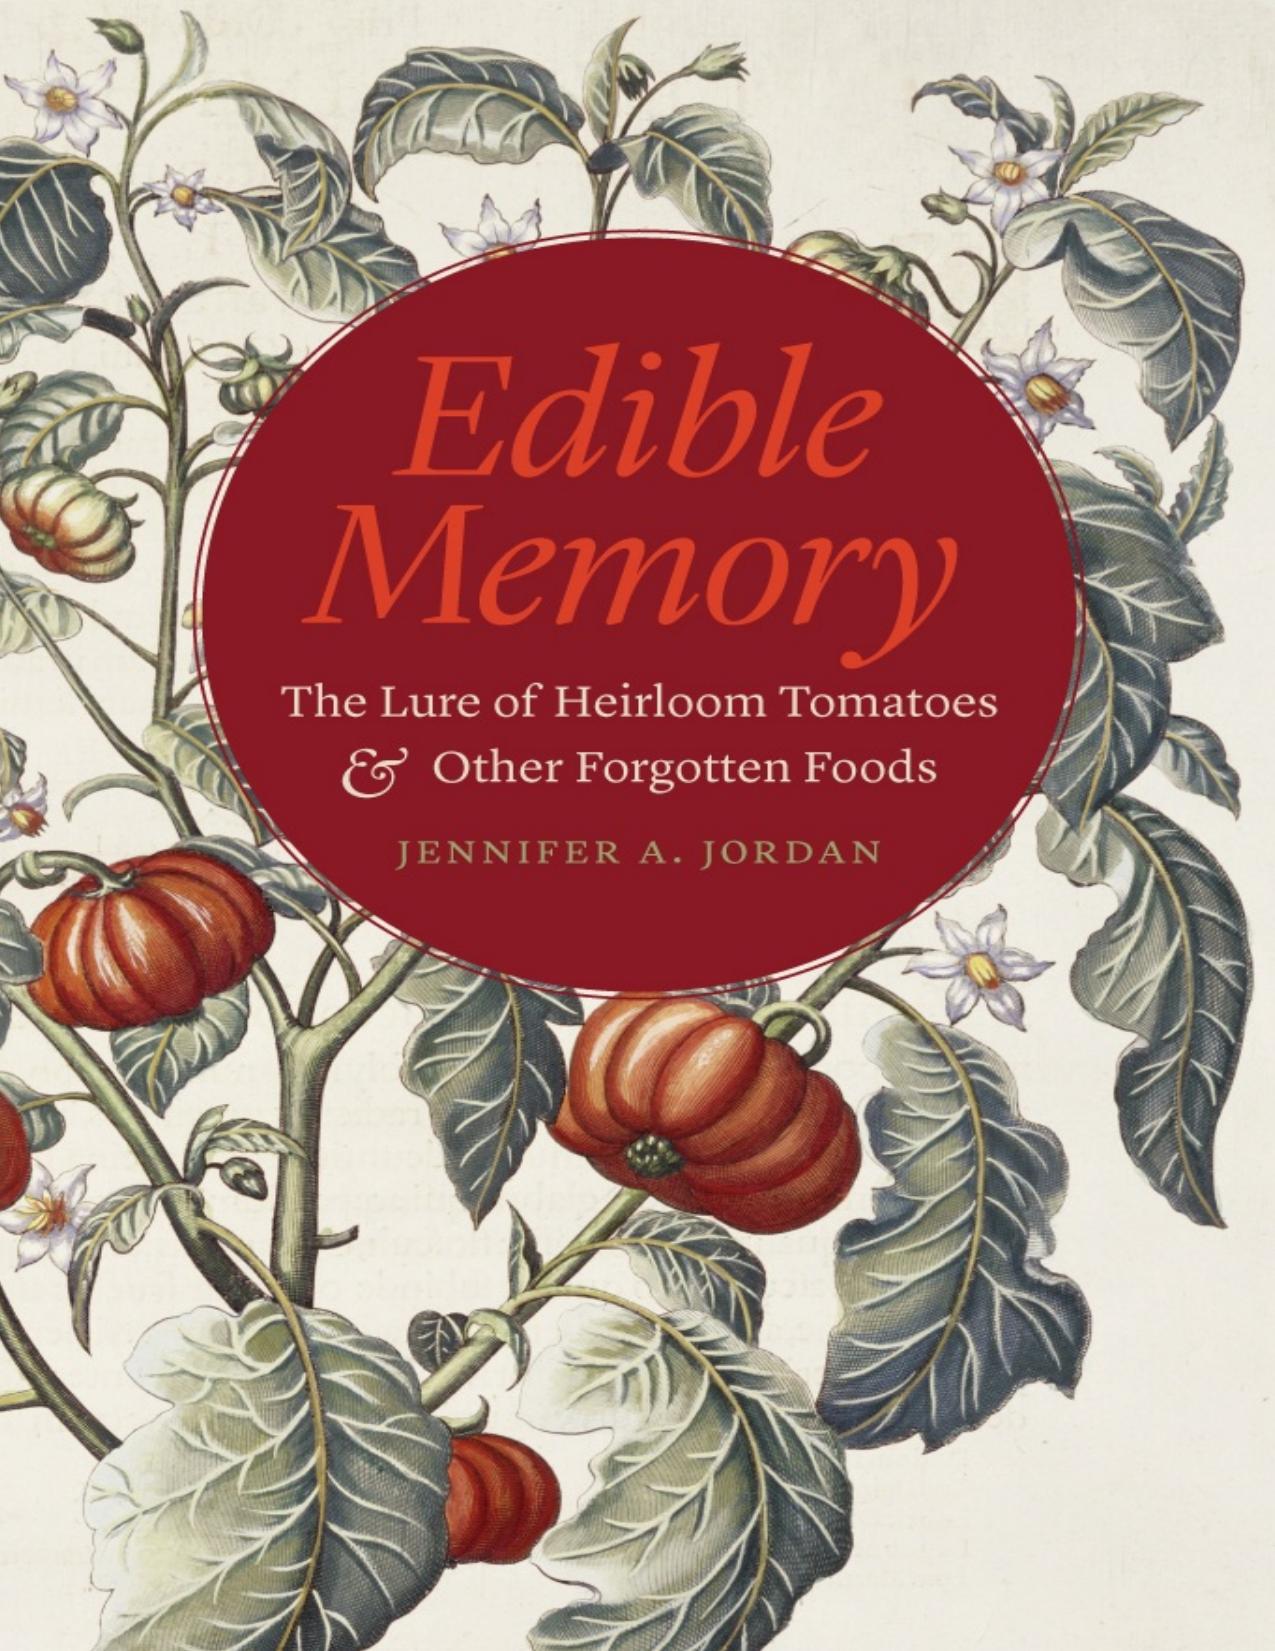 Edible Memory: The Lure of Heirloom Tomatoes and Other Forgotten Foods by Jennifer A. Jordan